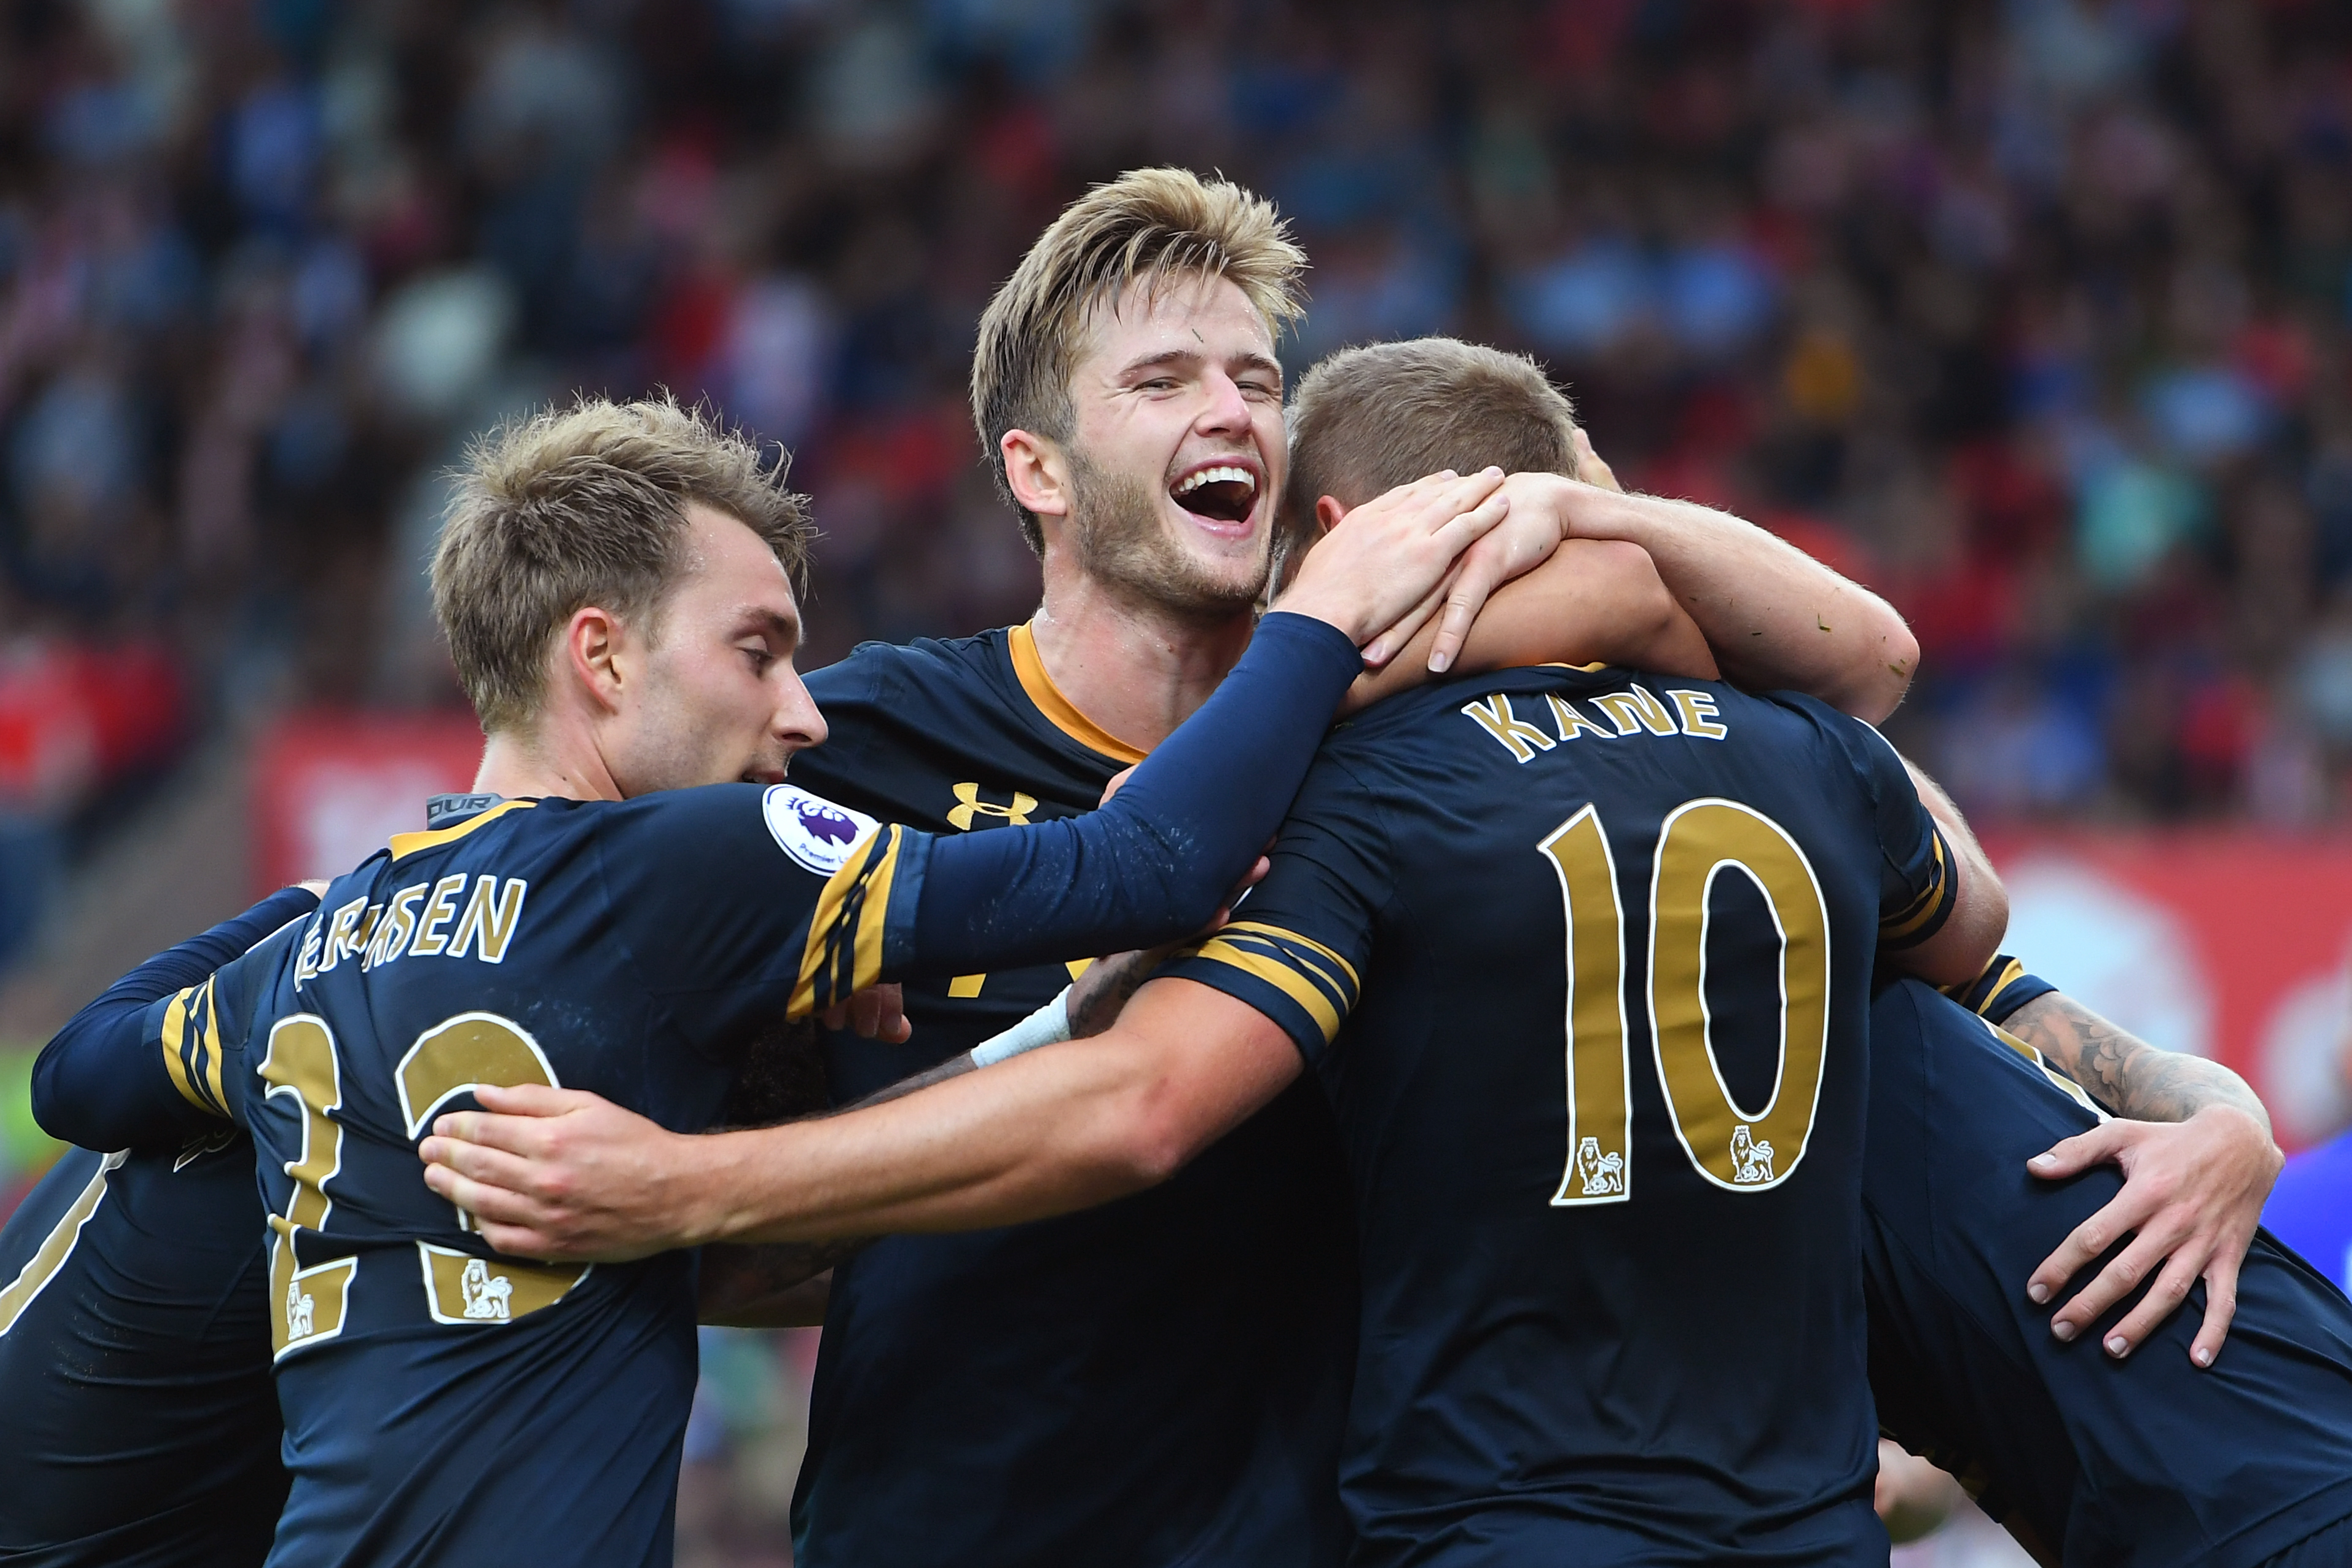 STOKE ON TRENT, ENGLAND - SEPTEMBER 10:  Harry Kane of Tottenham Hotspur (R) celebrates scoring his sides first goal with Eric Dier of Tottenham Hotspur (L) during the Premier League match between Stoke City and Tottenham Hotspur at Britannia Stadium on September 10, 2016 in Stoke on Trent, England.  (Photo by Laurence Griffiths/Getty Images)